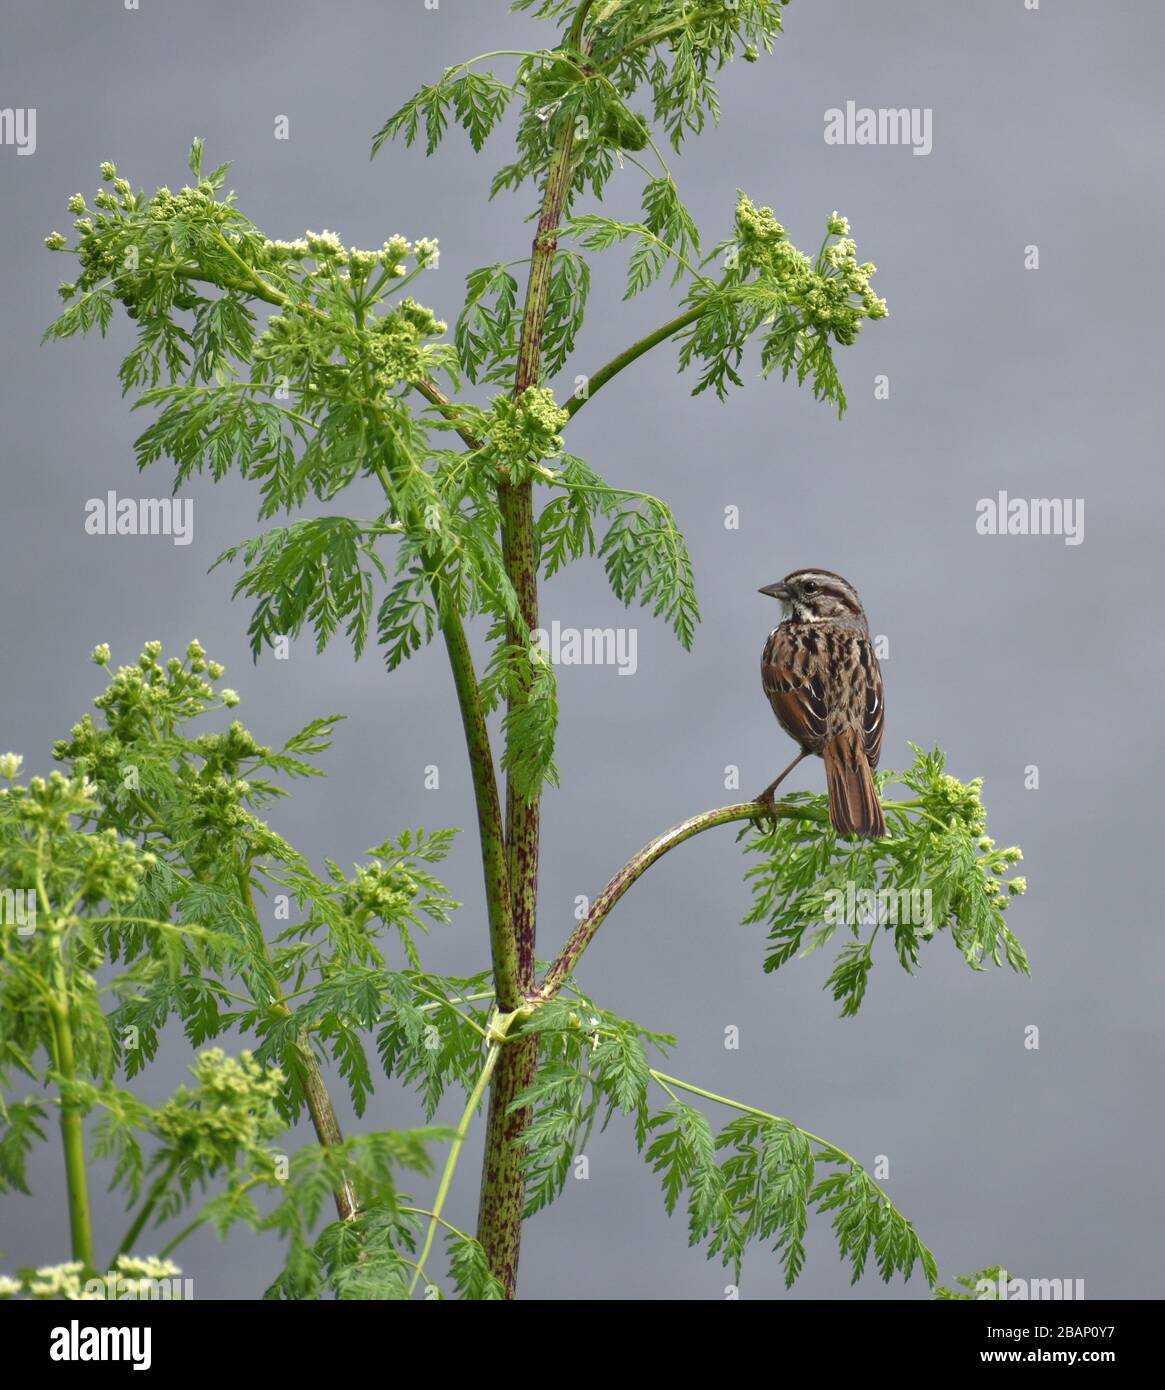 A song sparrow (Melospiza melodia) perched on a green plant of non-native poison hemlock (Conium maculatum) near Struve Slough in California. Stock Photo